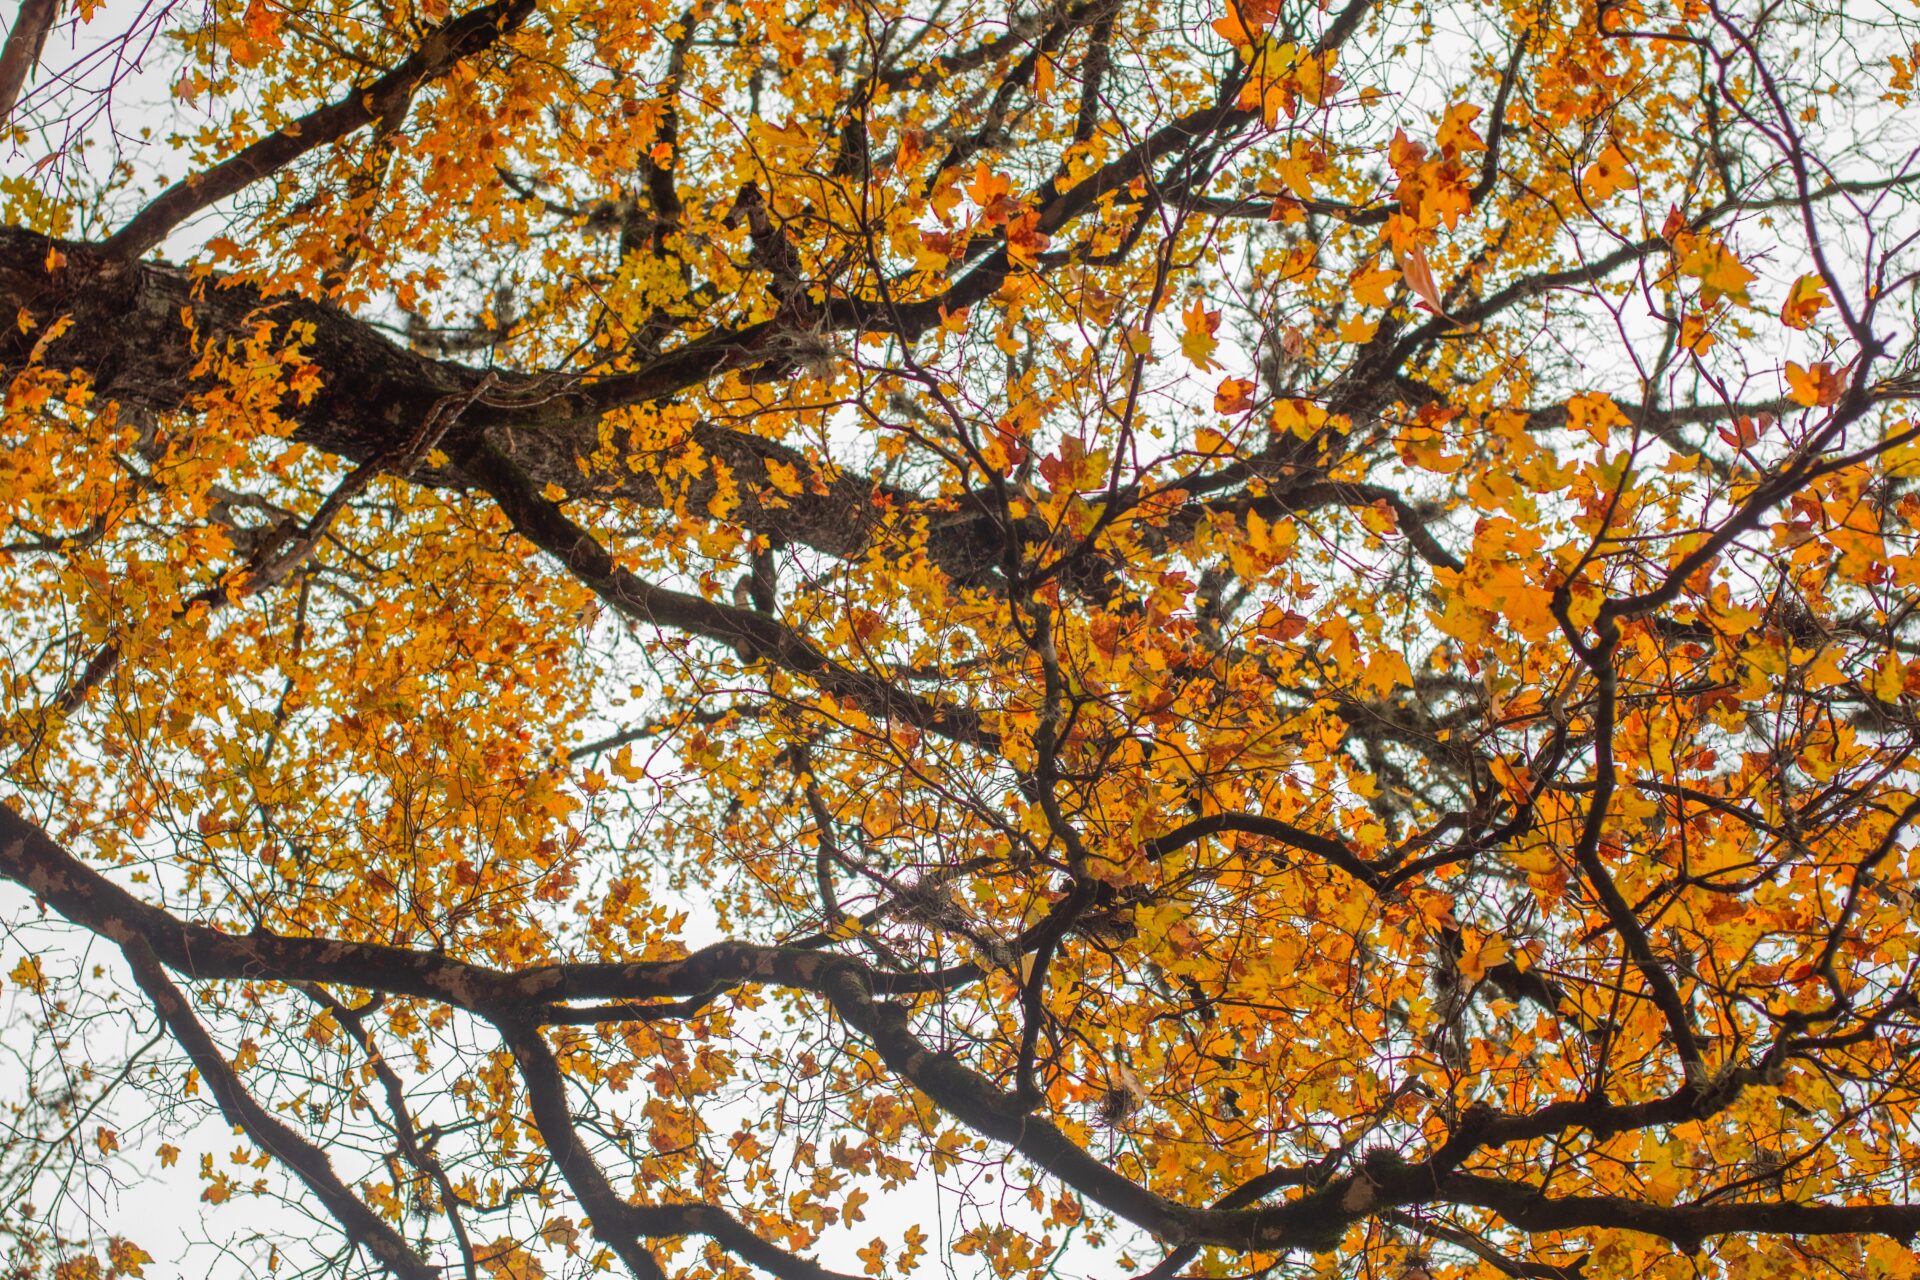 An image of a tree with yellow leaves.